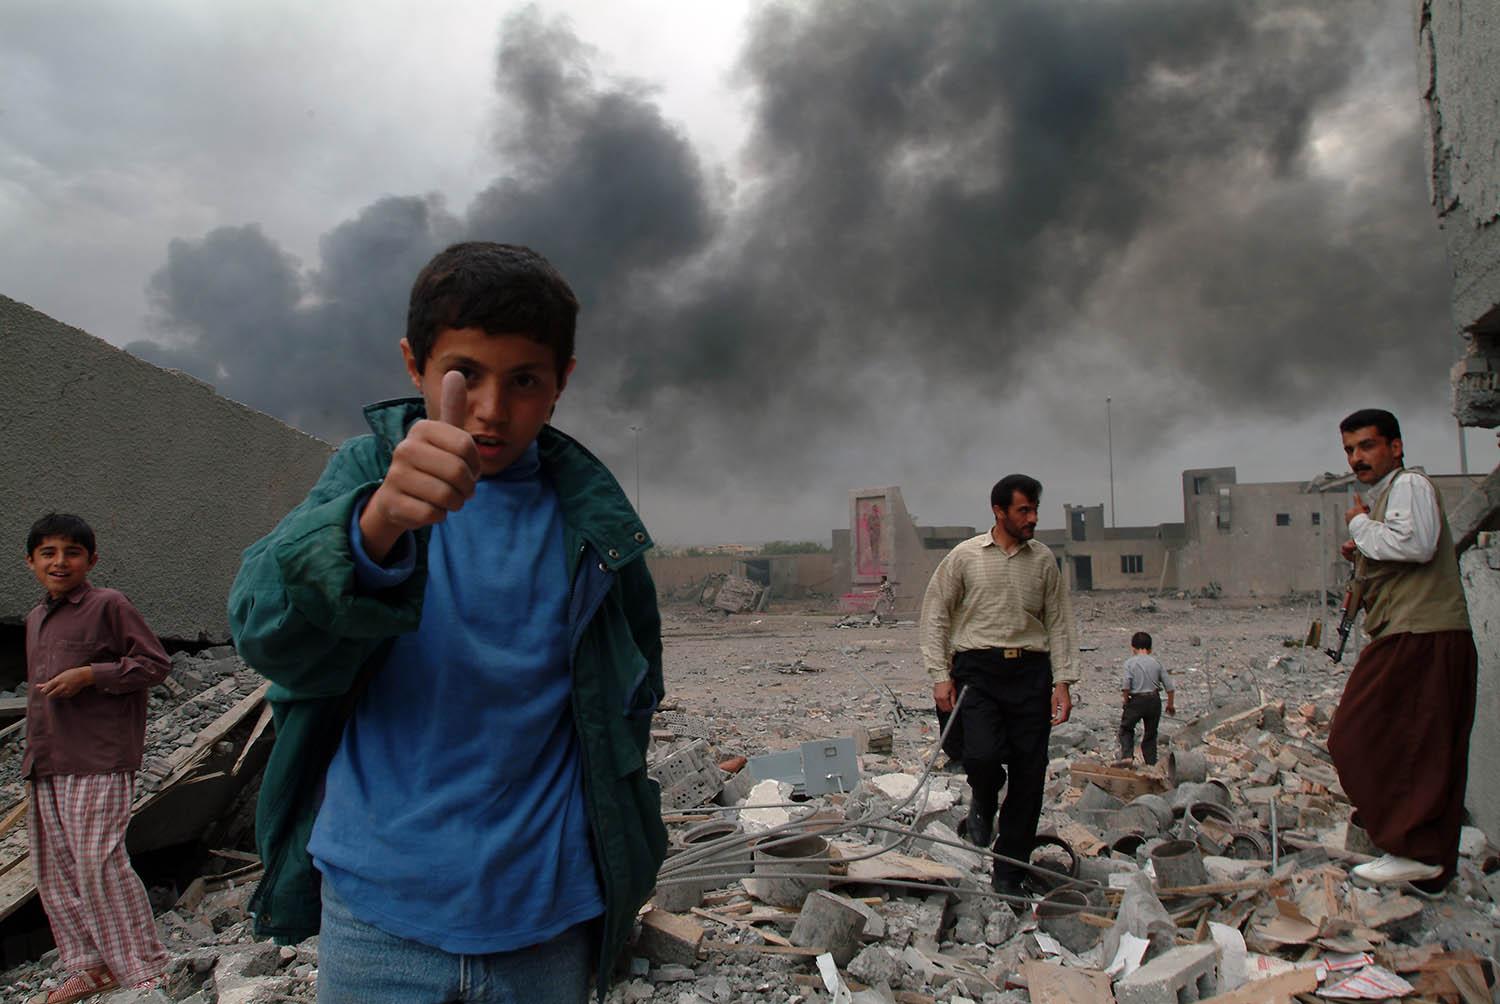 The Iraq War in 2004, captured by Canadian photojournalist Rita Leistner